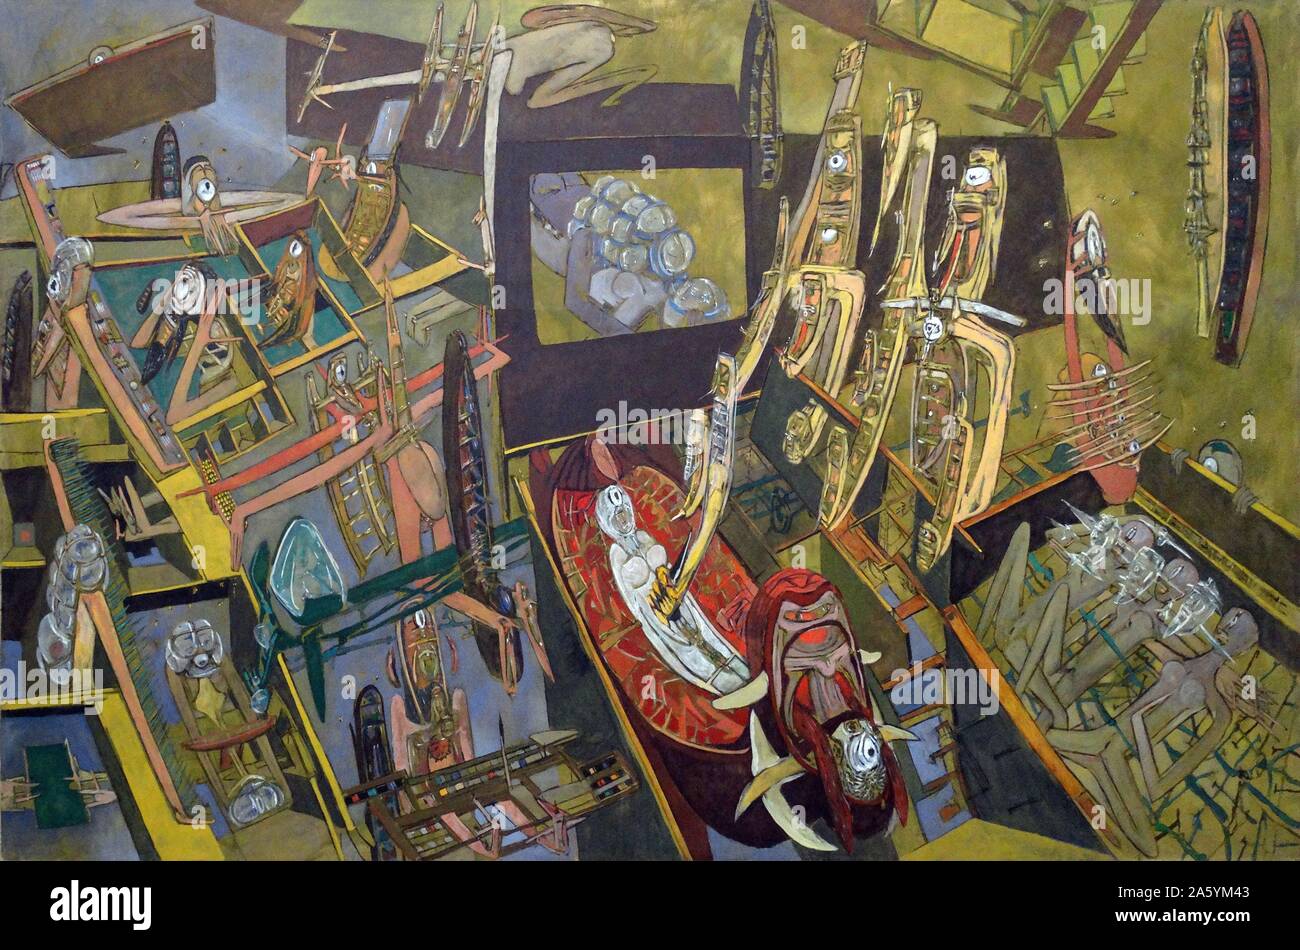 How-Ever by Roberto Matta (1911-2002) Matta was one of Chile's best-known painters and a seminal figure in 20th century abstract expressionism and surreal art. Stock Photo